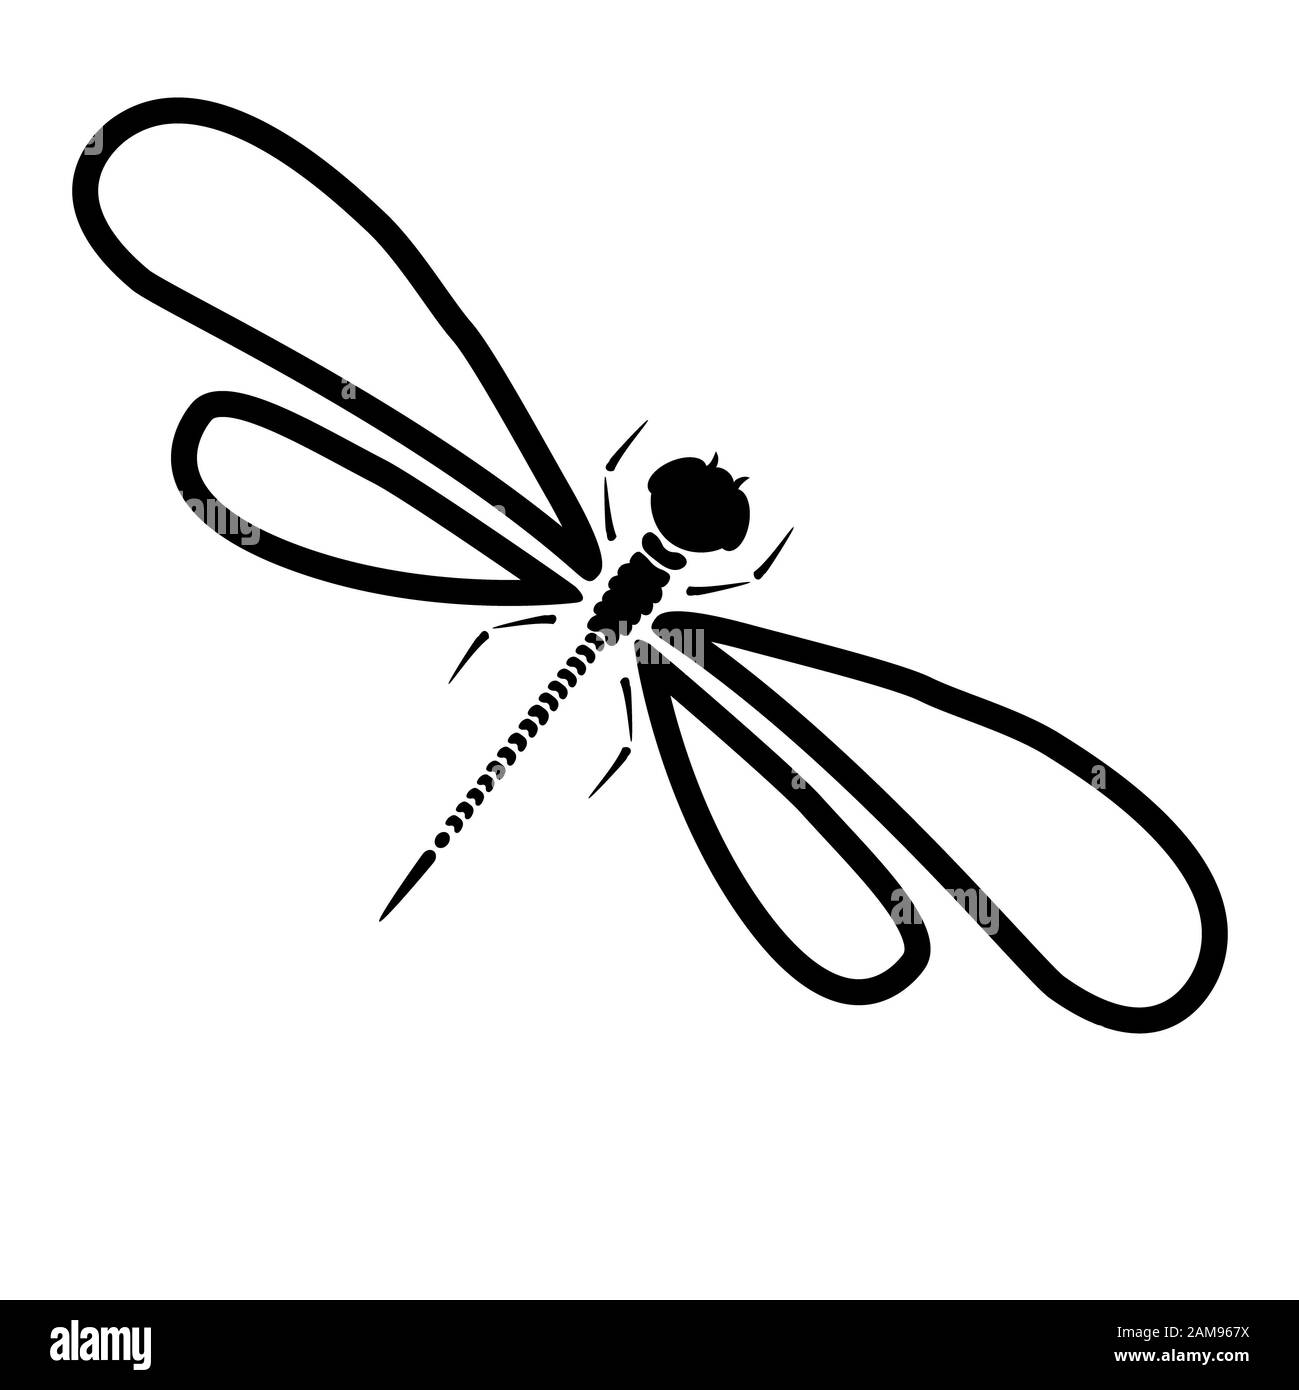 dragon-fly silhouette. Cartoon graphic illustration of damselfly isolated  with black and white wings. Sketch insect dragonfly Stock Photo - Alamy